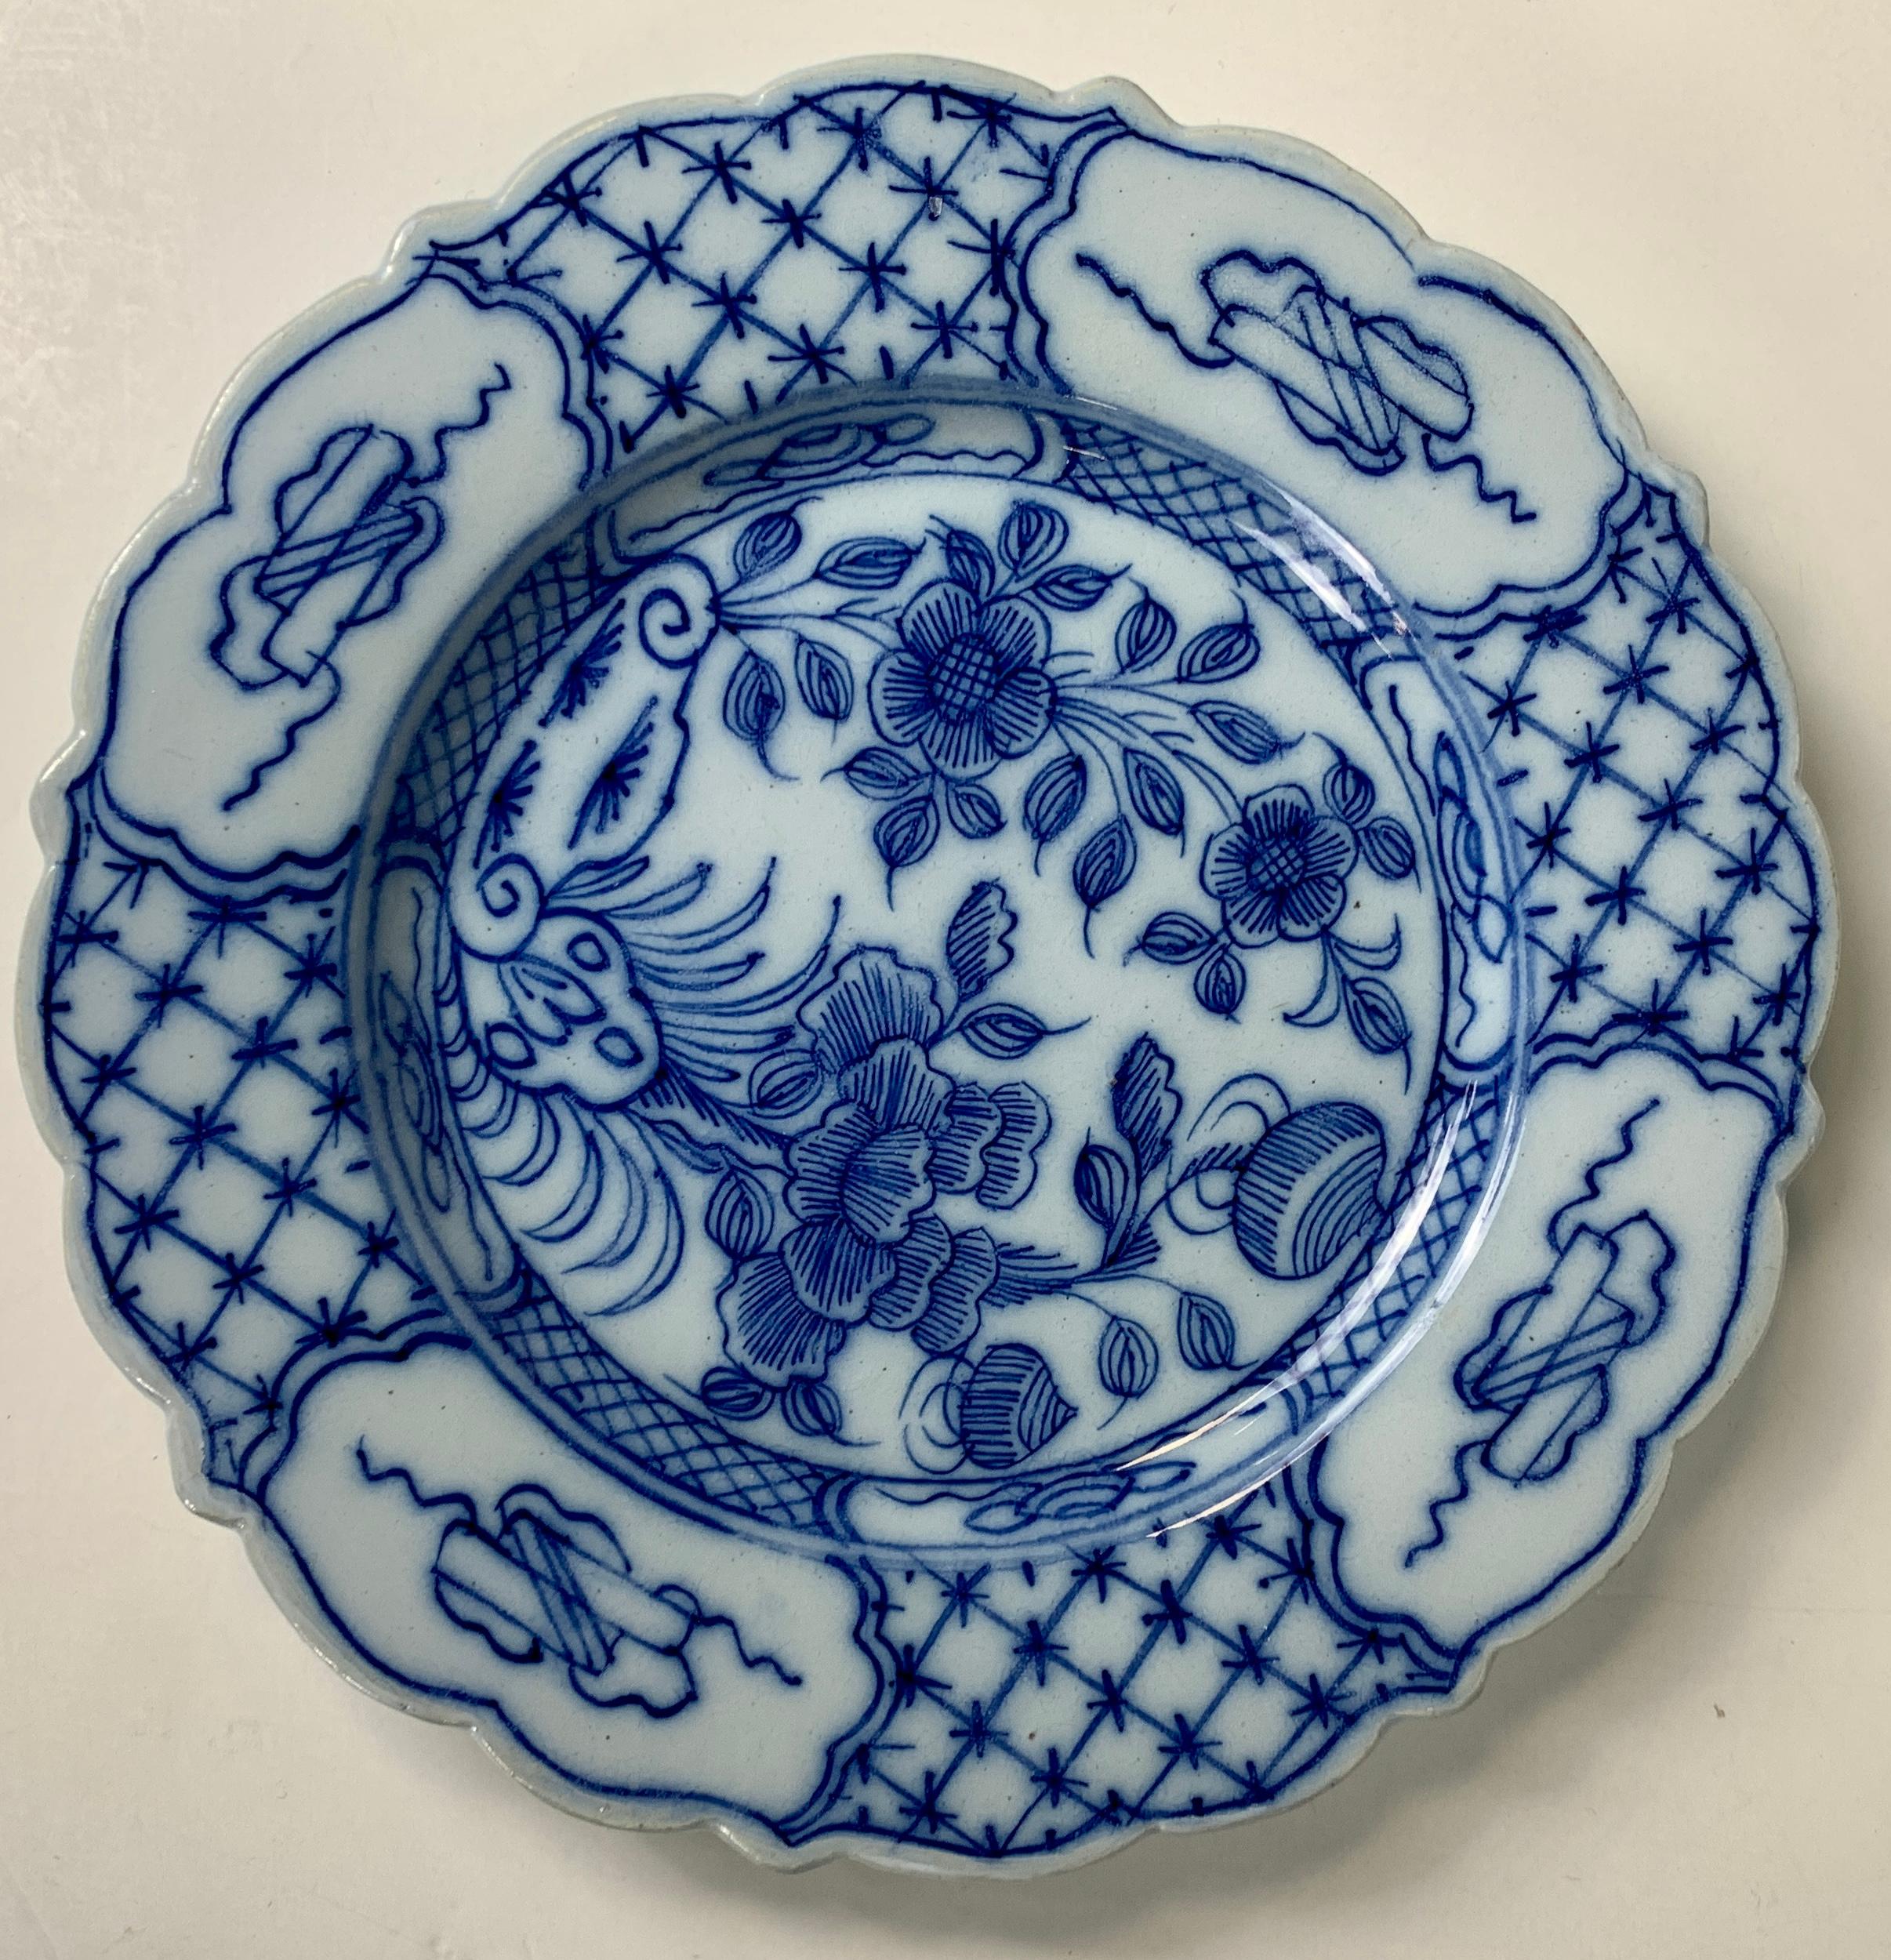 A pair of blue and white Dutch Delft dishes hand-painted in the chinoiserie style. The center of each dish shows two flowering plants in full bloom. Look closely, and you will see that all the painting is done in lines as if by pen or pencil. This